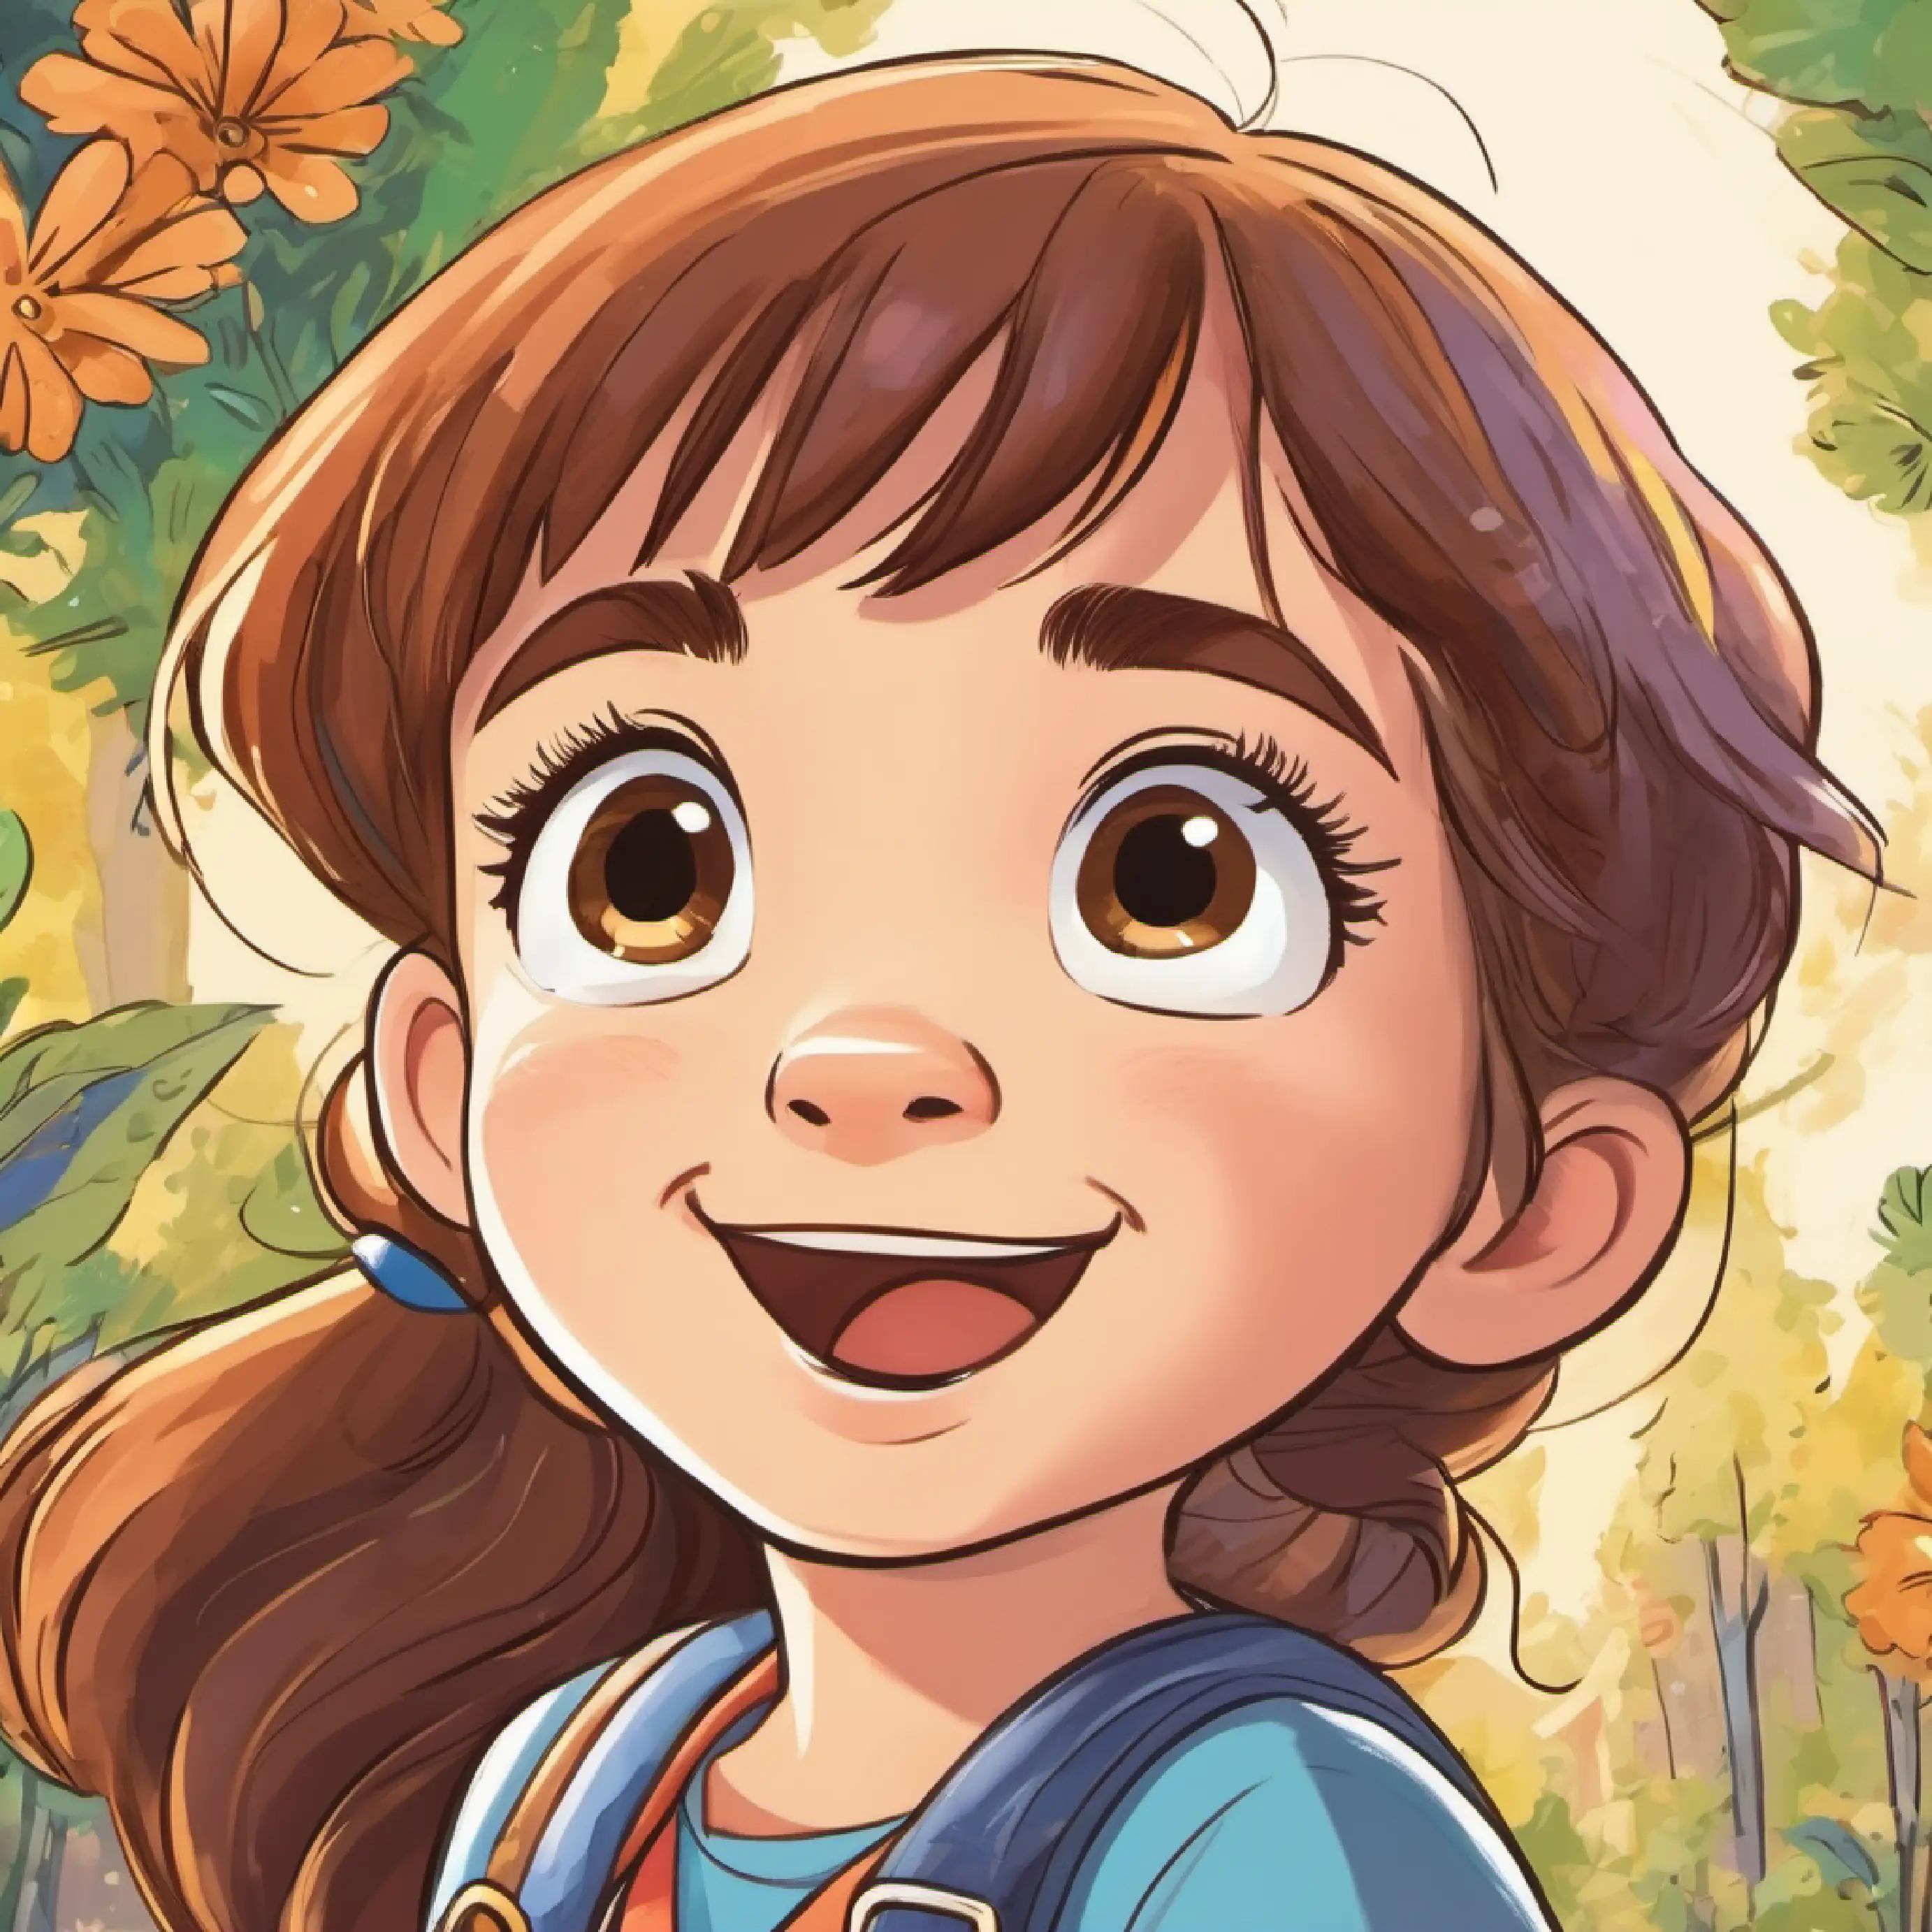 Curious girl with brown hair and hazel eyes excited about the number quest